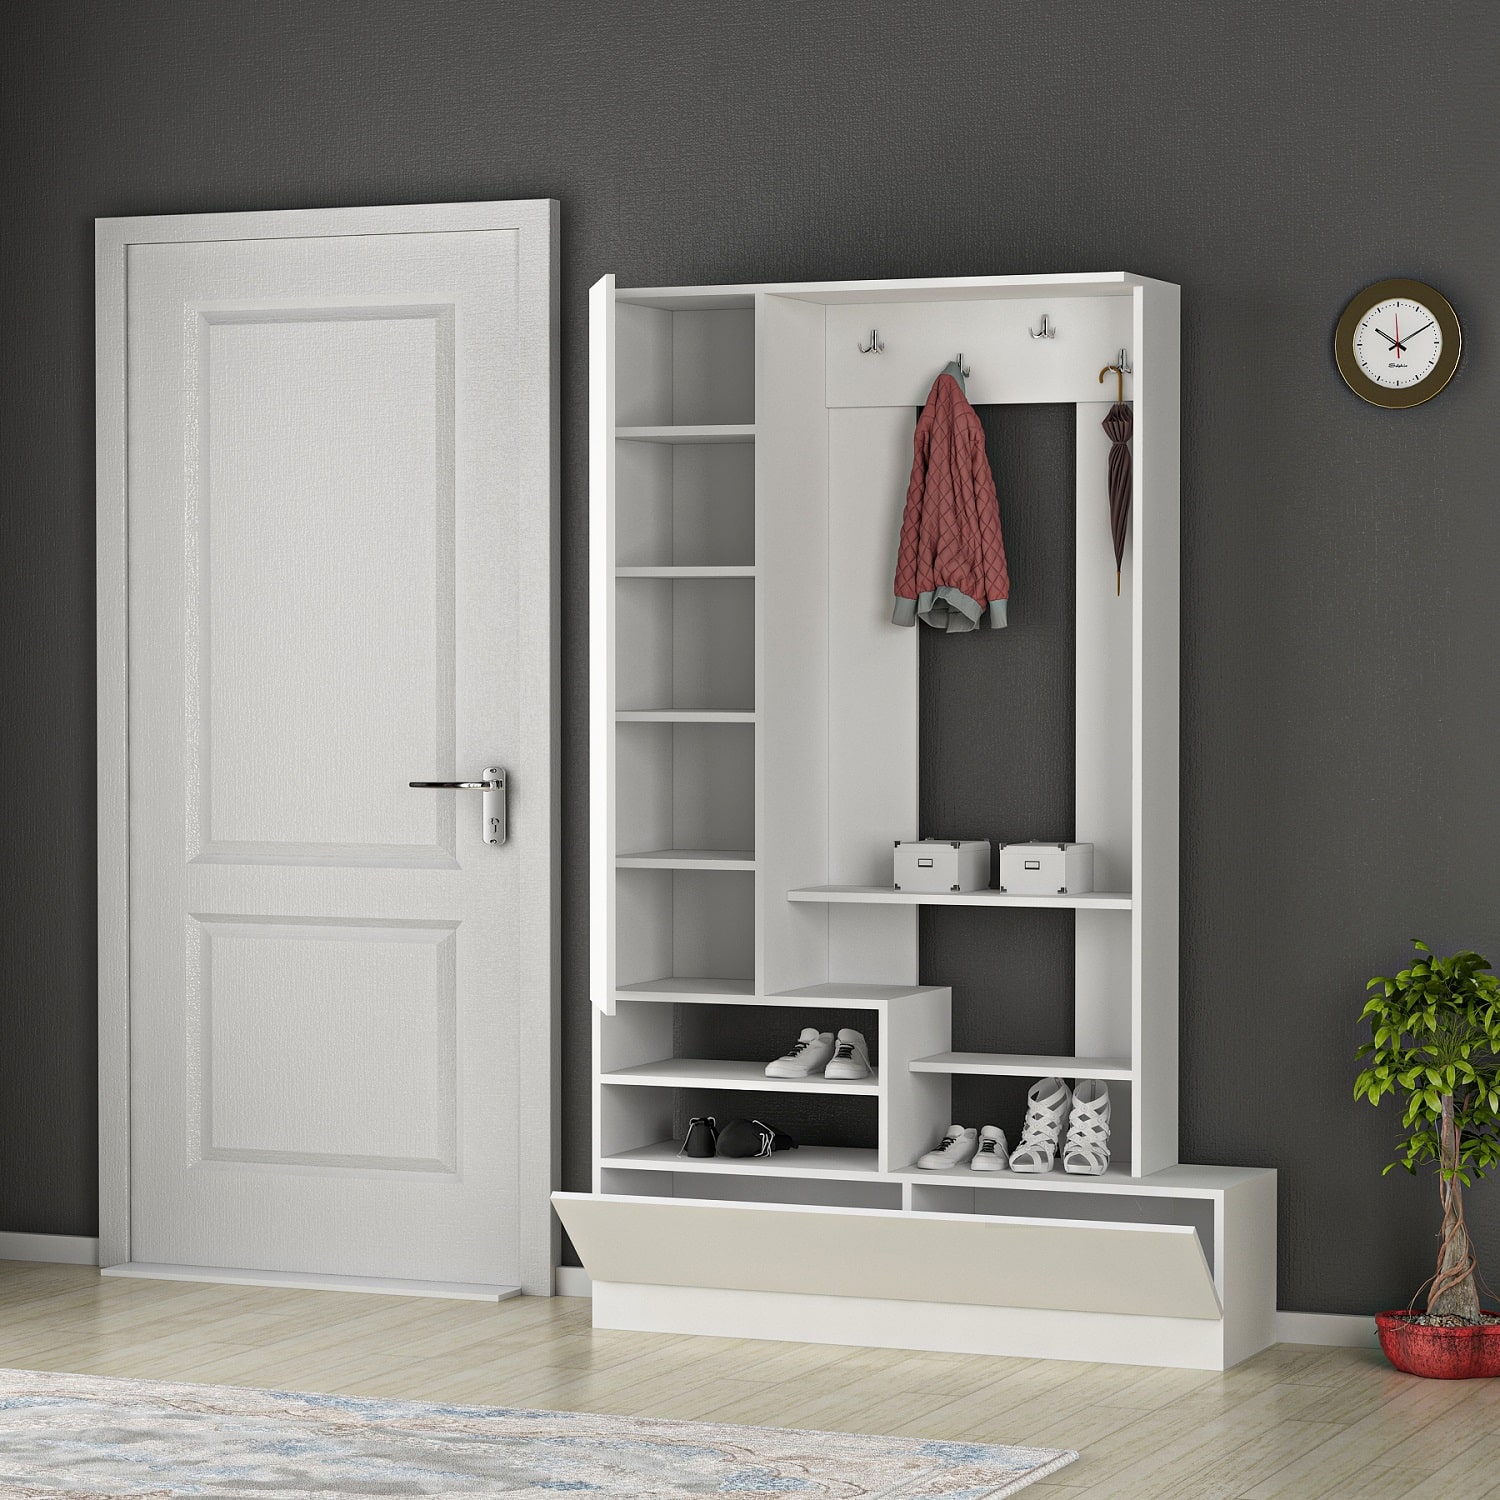 Seta Entryway Coat Rack - Home - Cabinets Netsan and Furniture Furniture White with & Garden Manufacturer Shelves 